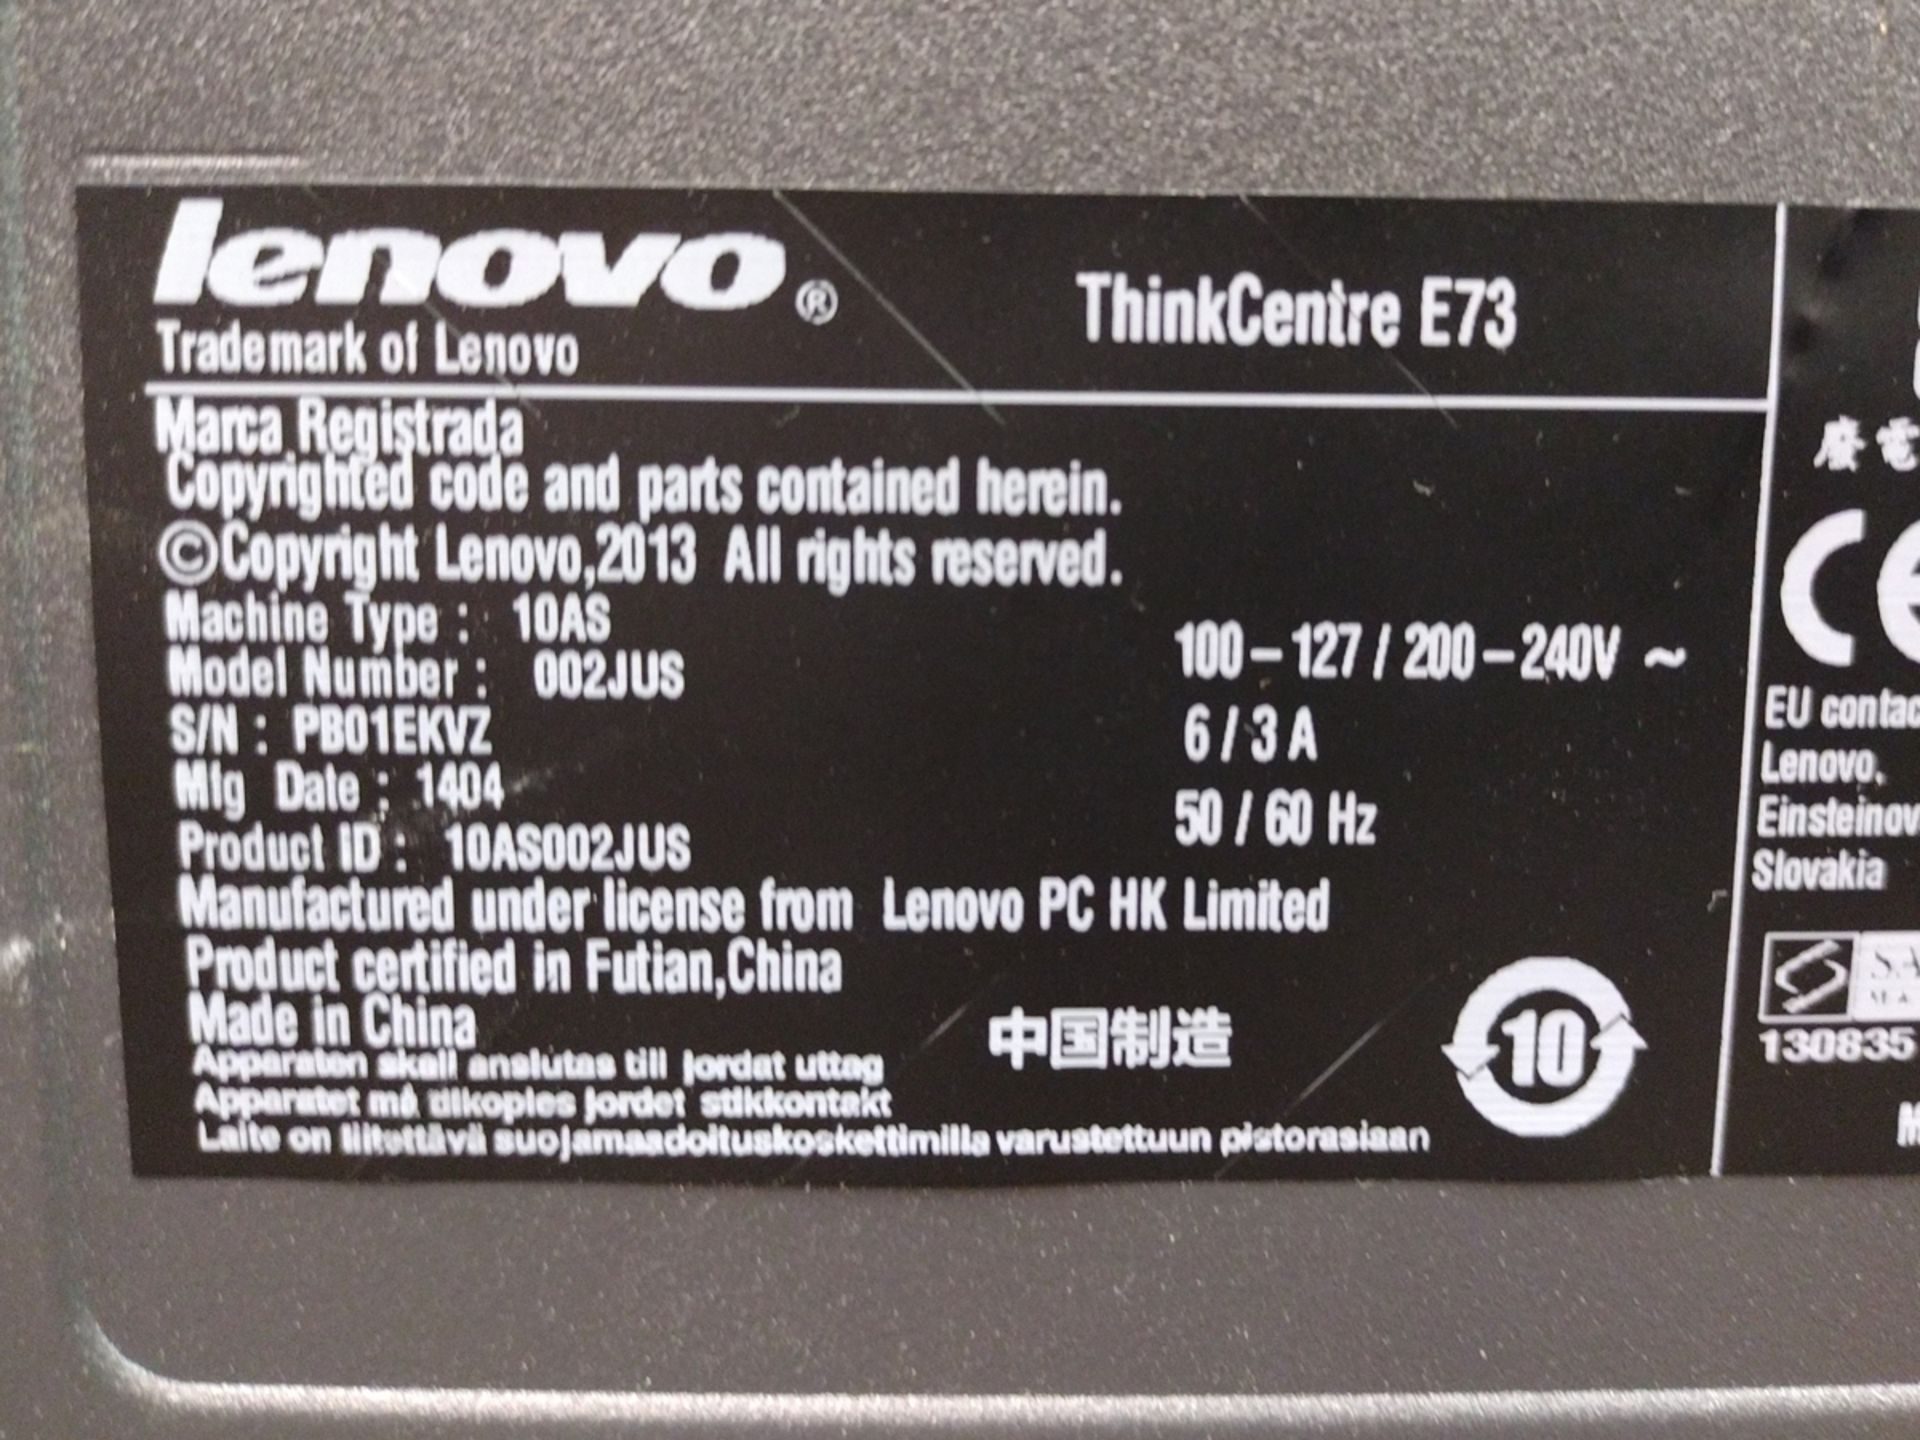 Lenovo ThinkCentre i3 PC w/ Monitor and Keyboard - Image 2 of 2